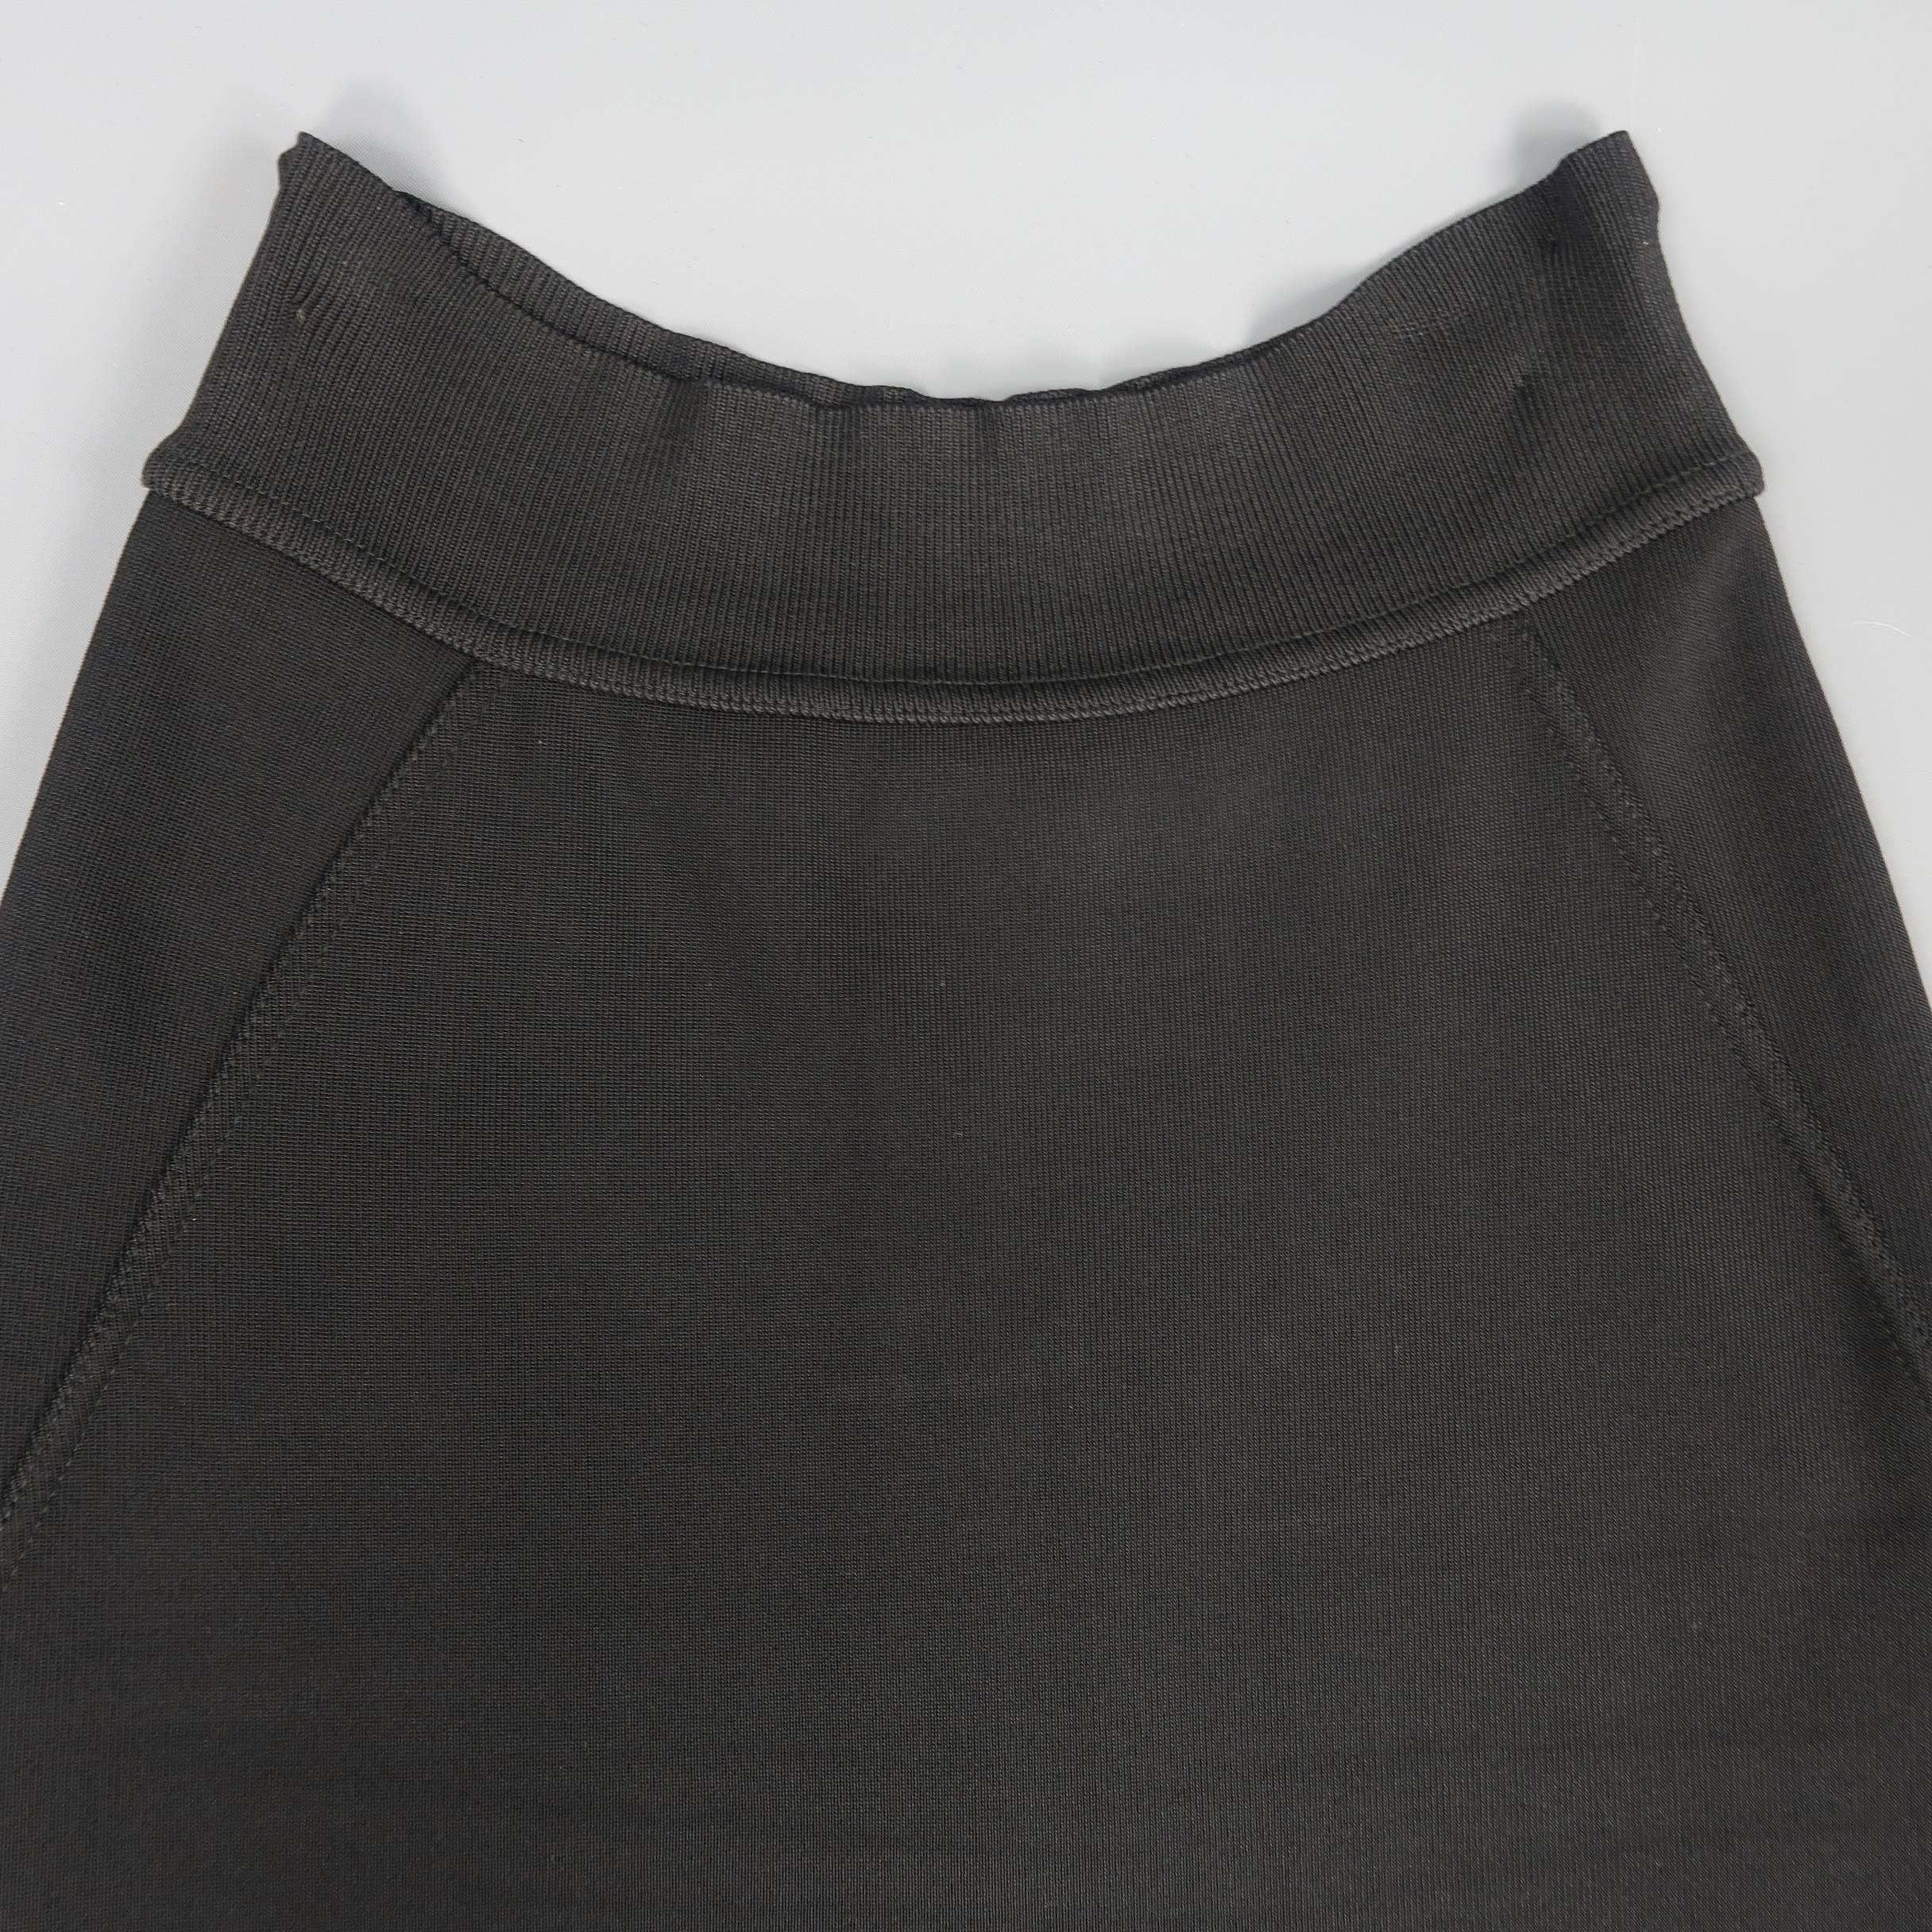 Vintage ALAIA bodycon pencil skirt comes in black stretch rayon knit with a high rise, side panels, and thick waistband. Made in Italy.
 
Good Pre-Owned Condition.
Marked: S
 
Measurements:
 
Waist: 24 in.
Hip: 31 in.
Length: 21 in.
